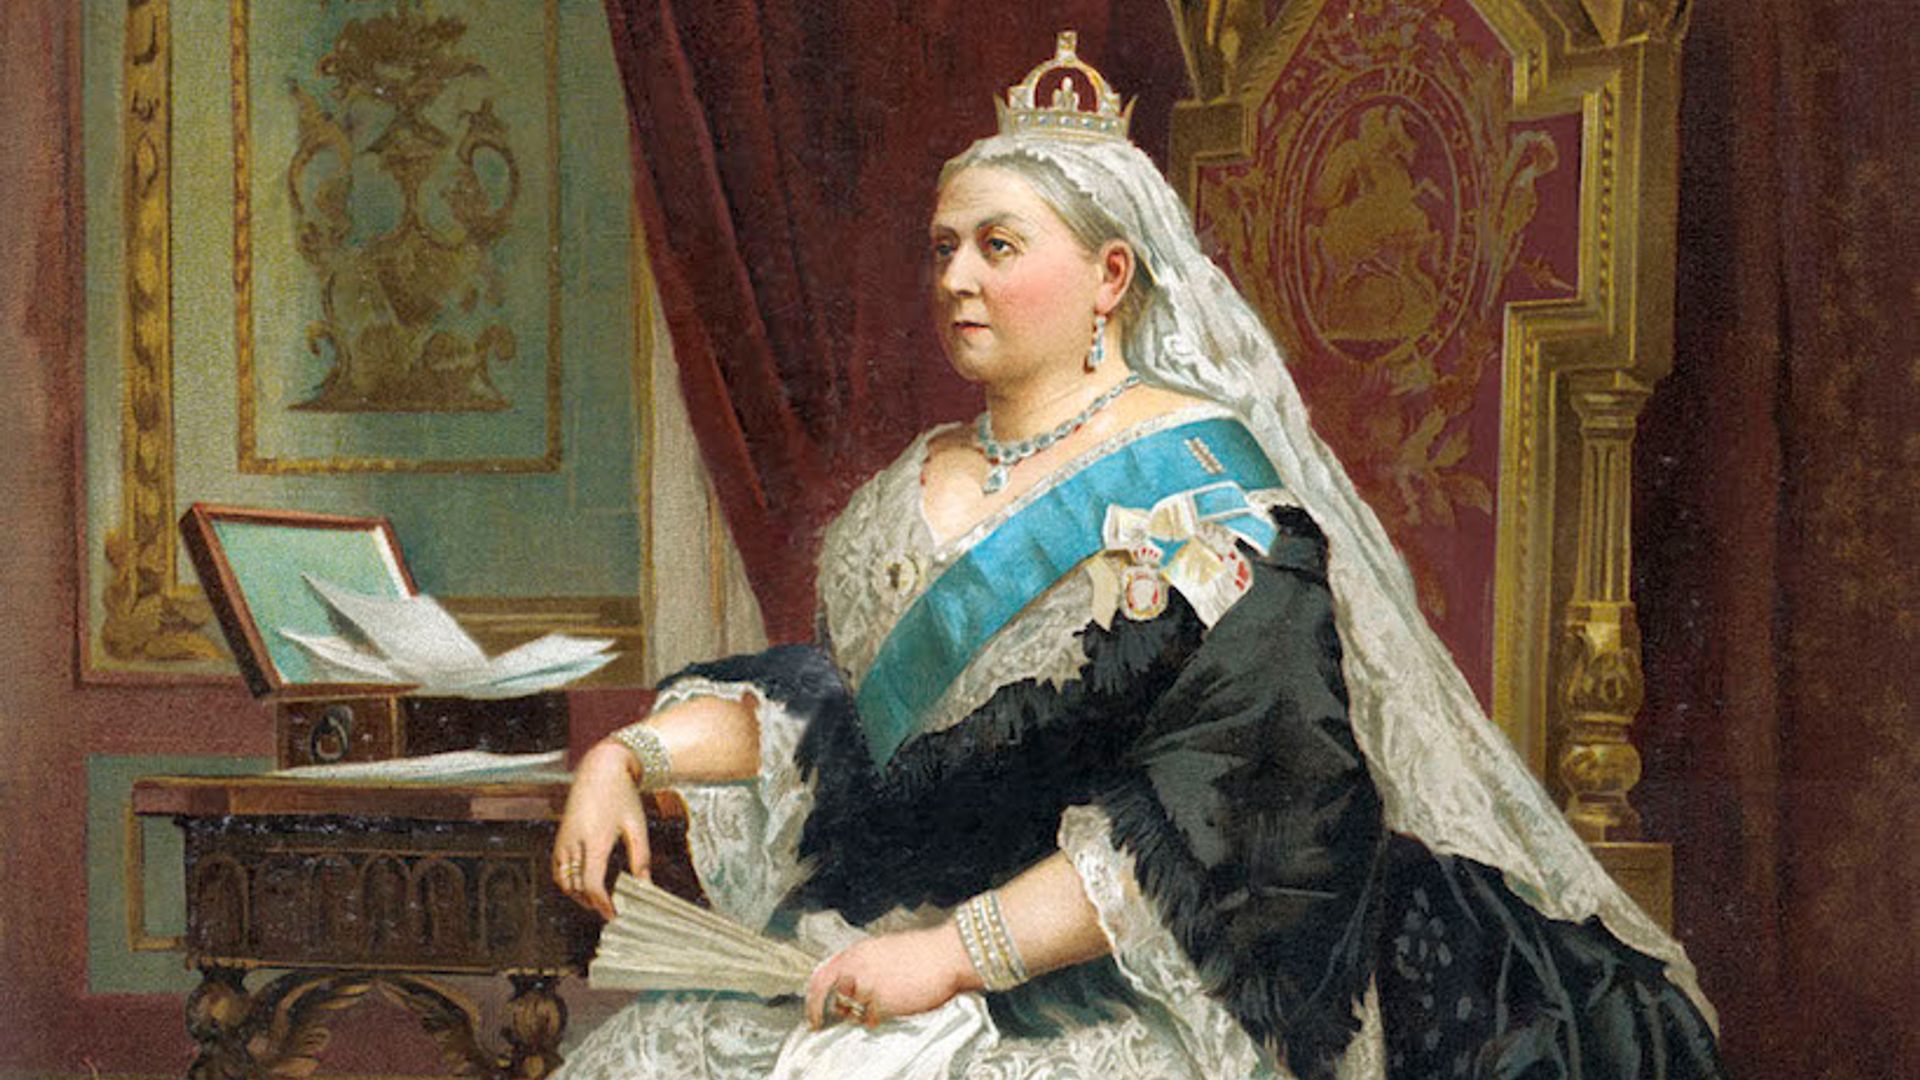 One of Queen Victoria's archived dresses is going on display for the first time – and you won't believe how tiny it is